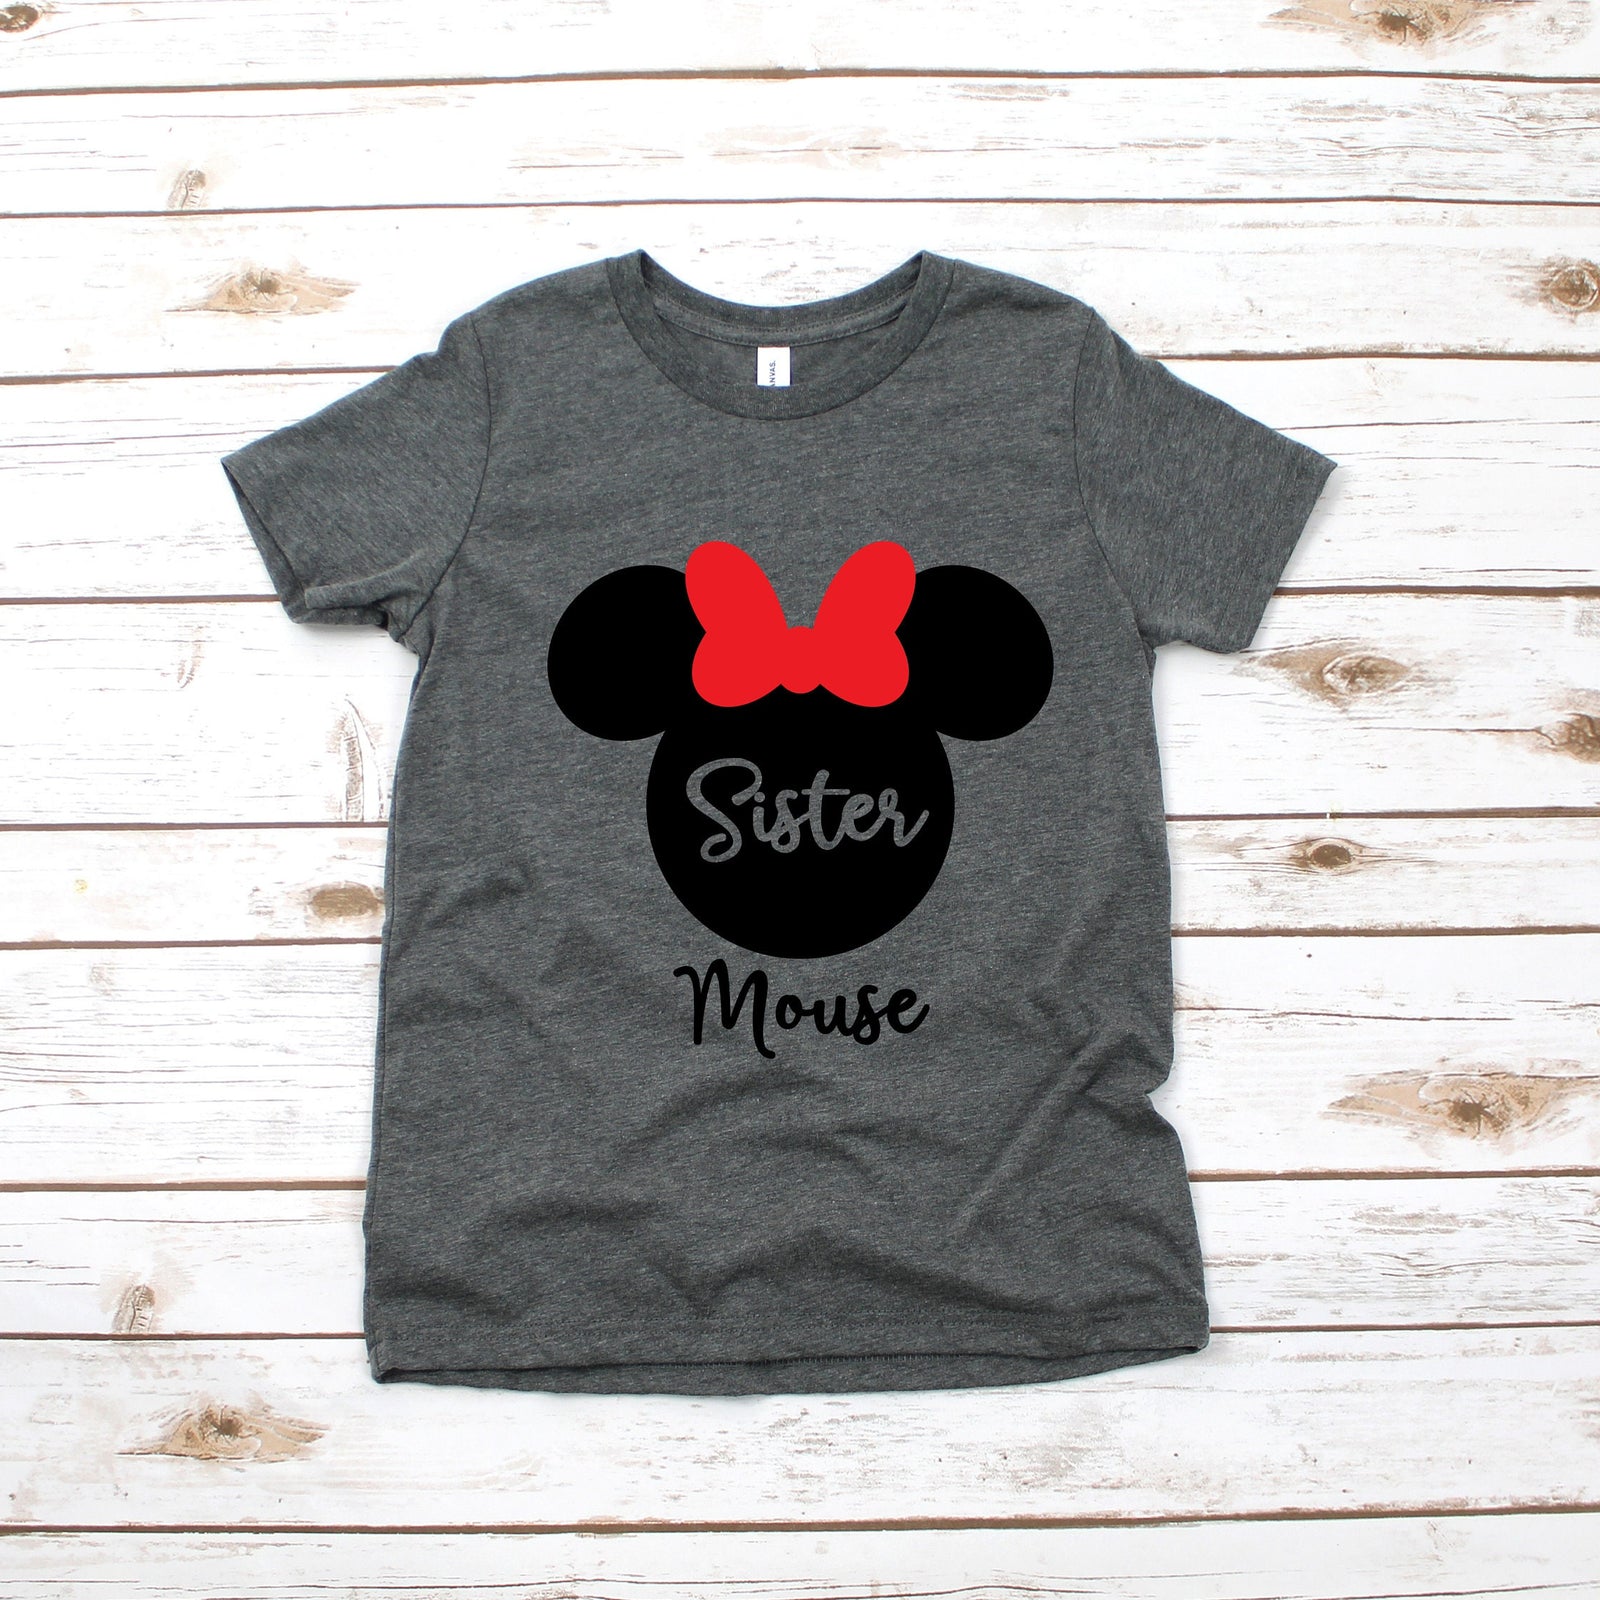 Sister Mouse Minnie Kids T Shirt - Infant Toddler Youth Minnie Shirt - Disney Kids Shirts - Family Matching